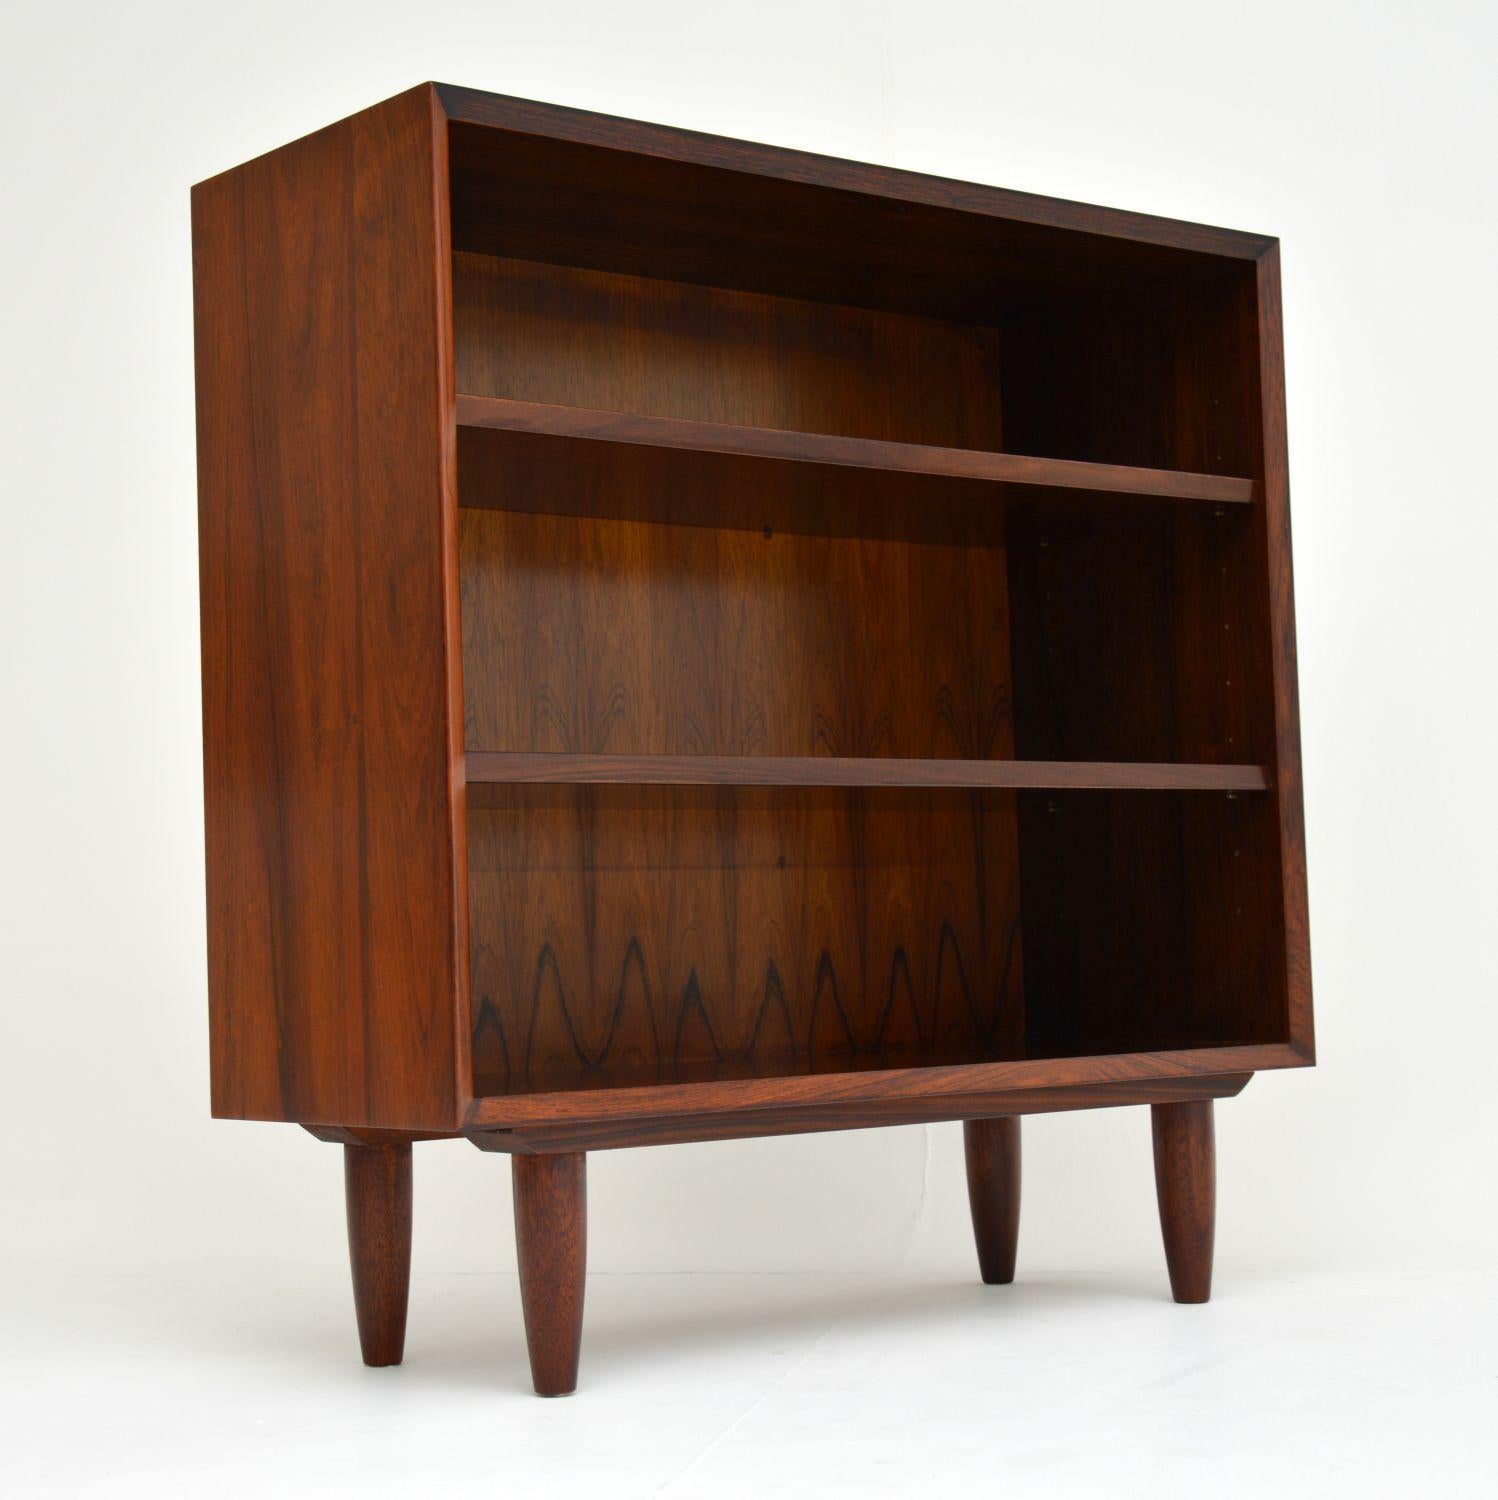 A smart and stylish vintage Danish open bookcase, this dates from the 1960s. It was designed by Poul Cadovius for Cado, and is of lovely quality. We have had this stripped and re-polished to a high standard, the condition is excellent throughout.